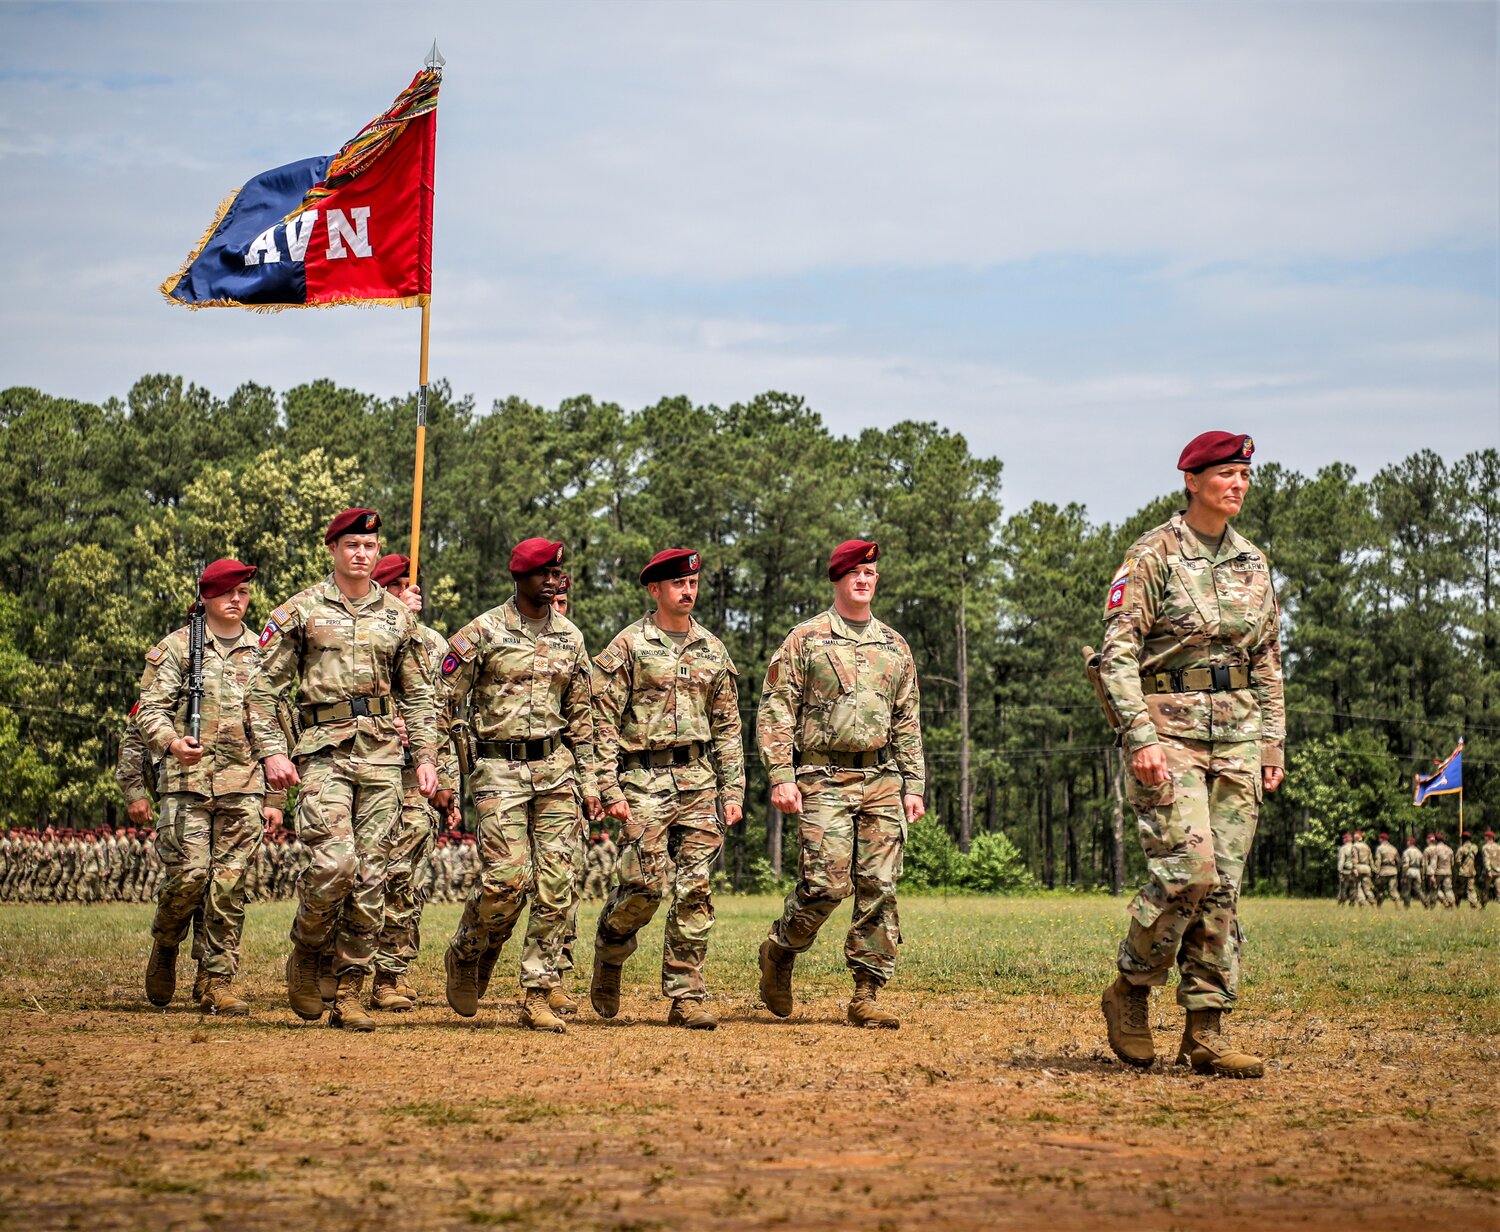 Soldiers take part in the Division Review during the recent All American Week on Fort Bragg. Twelve paratroopers who served in conflicts from World War II to Afghanistan were inducted into the All American Hall of Fame as the Class of 2023.